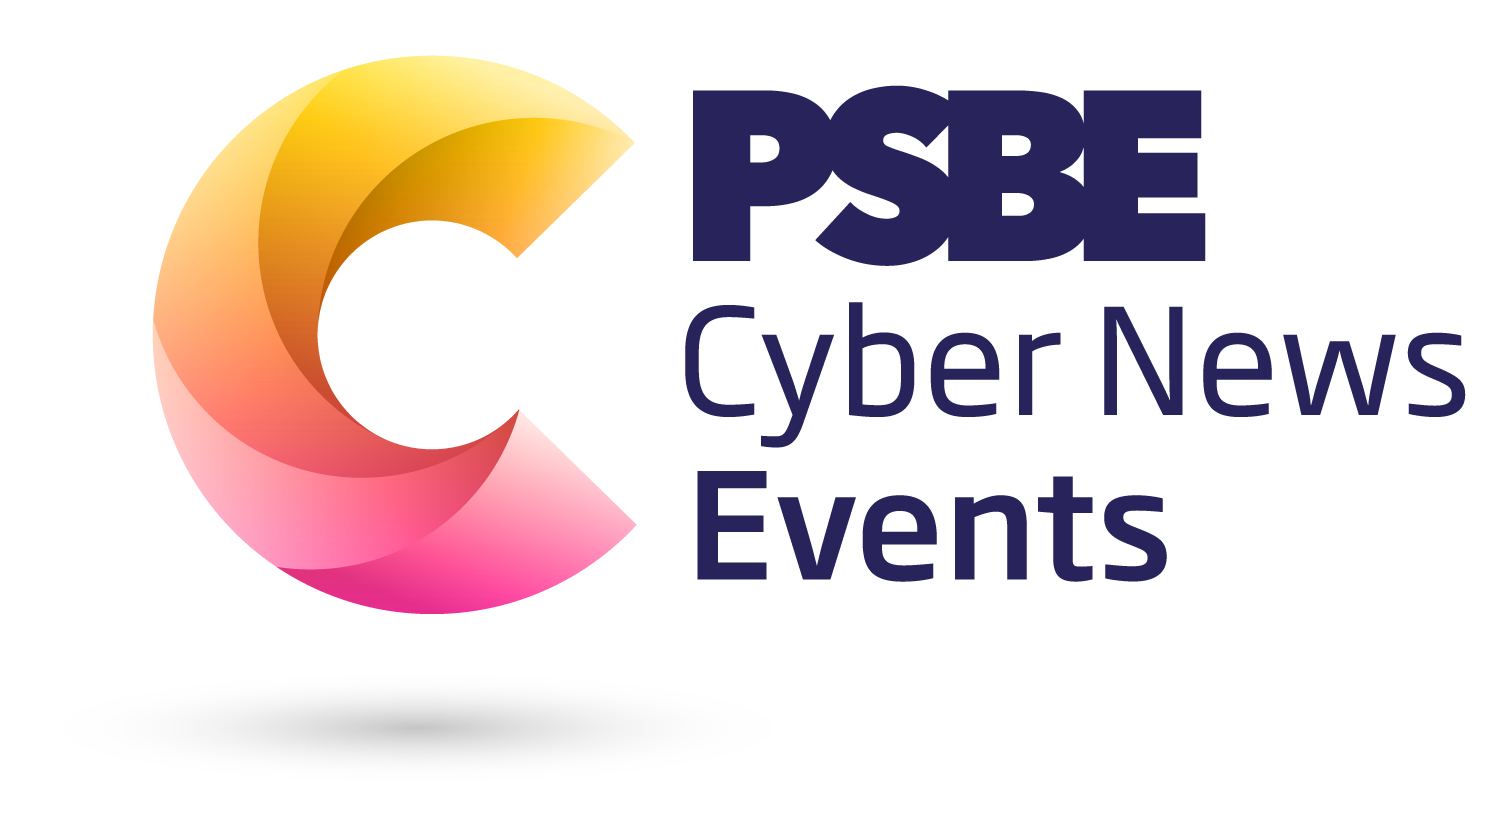 Cyber News Events